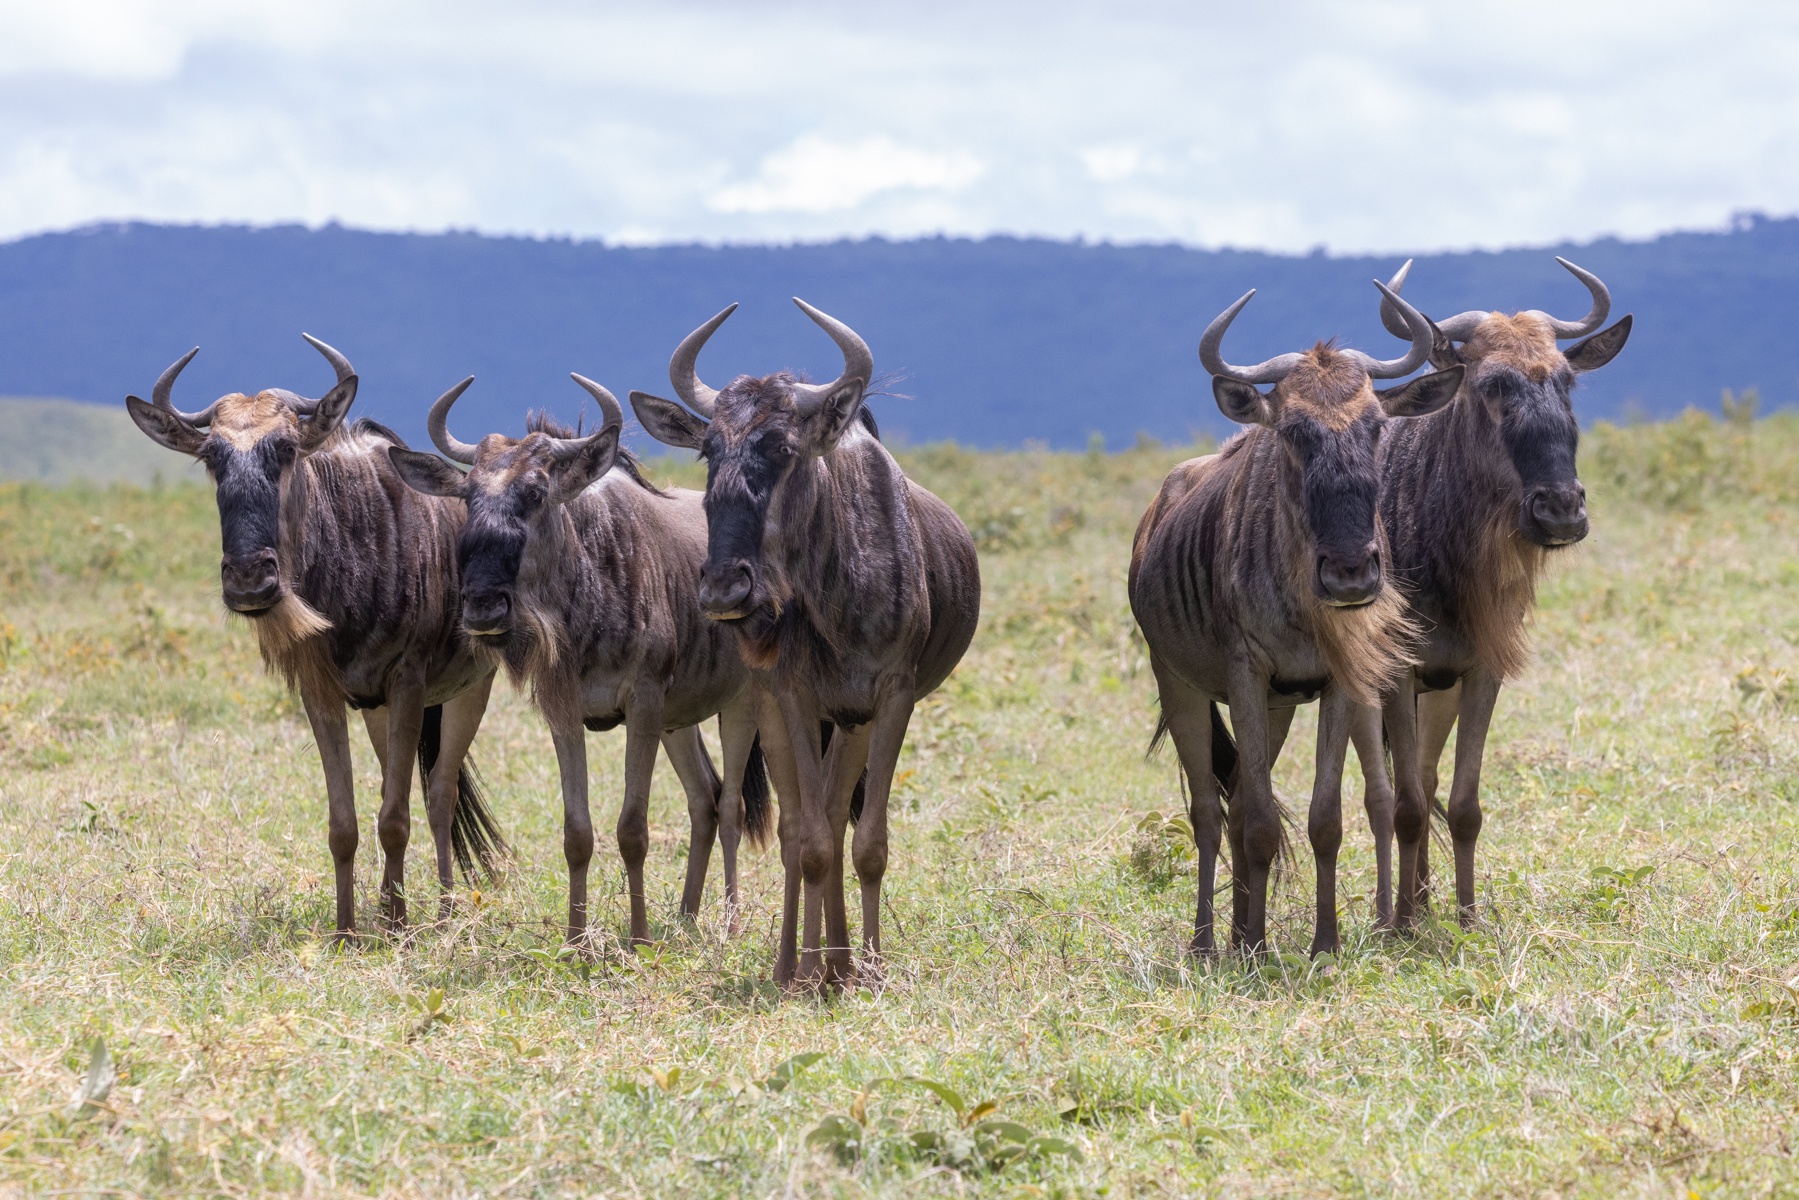 A group of wildebeest stop to look at us during one of our safaris in Ngorongoro